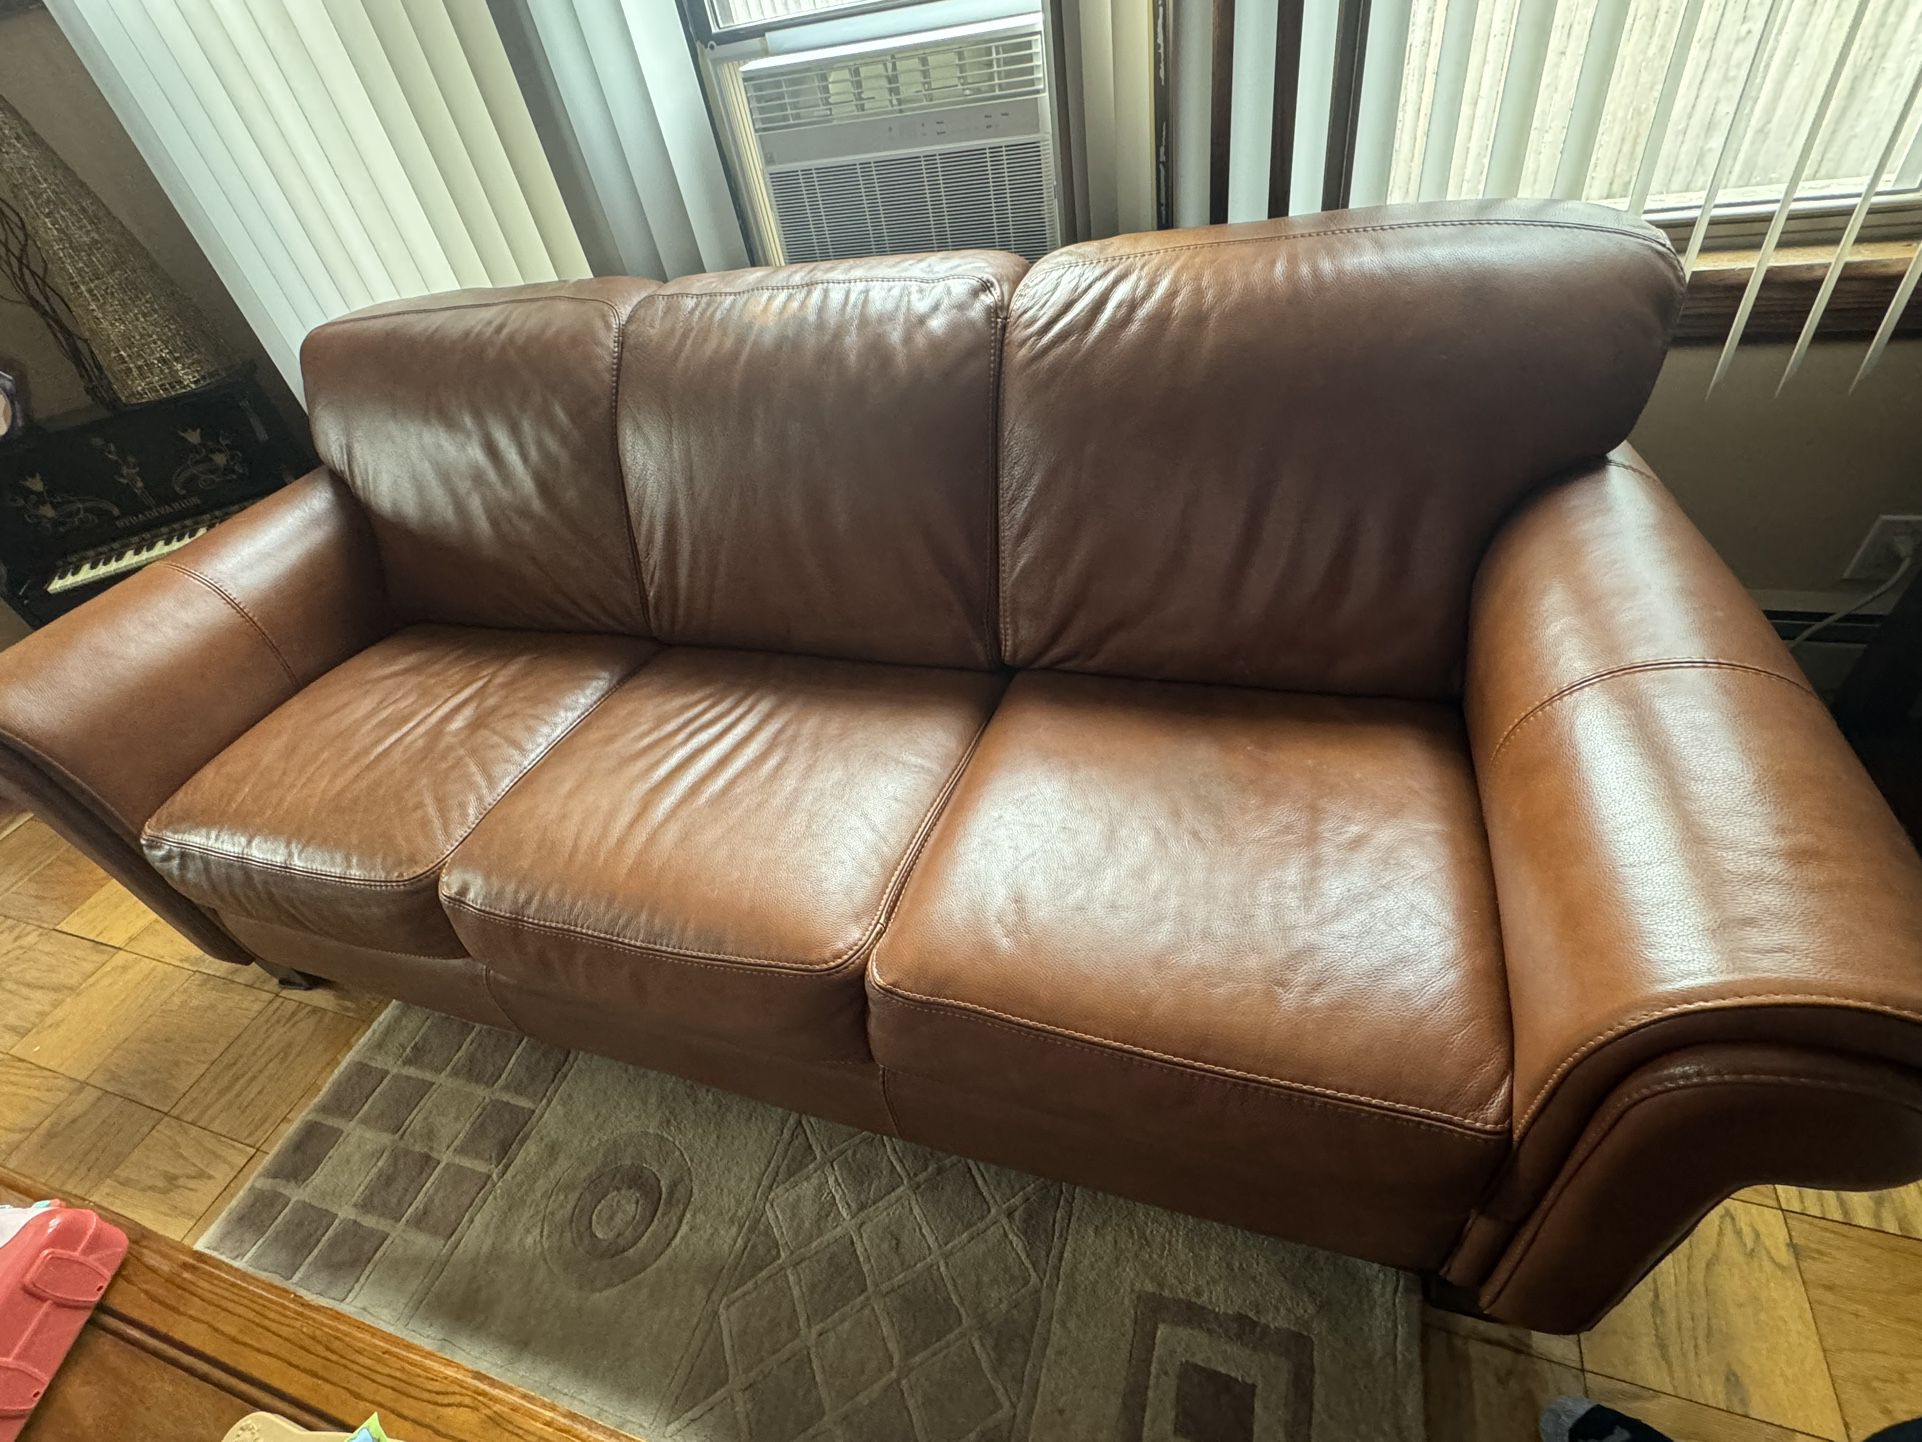 Brown Faux Leather Couch 